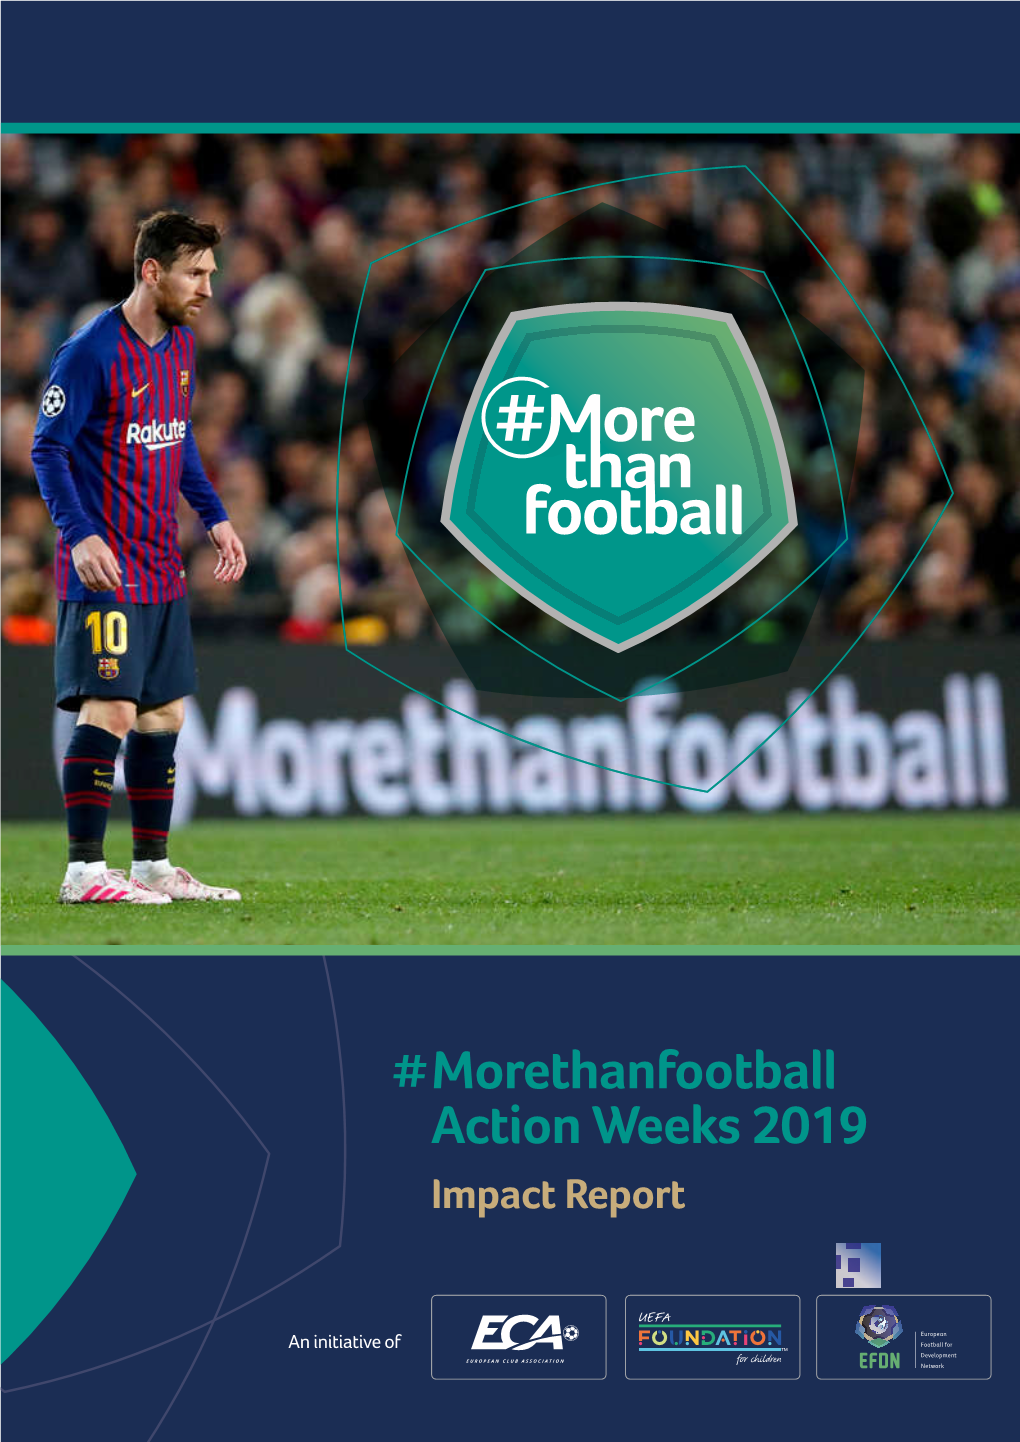 Morethanfootball Action Weeks 2019 Impact Report